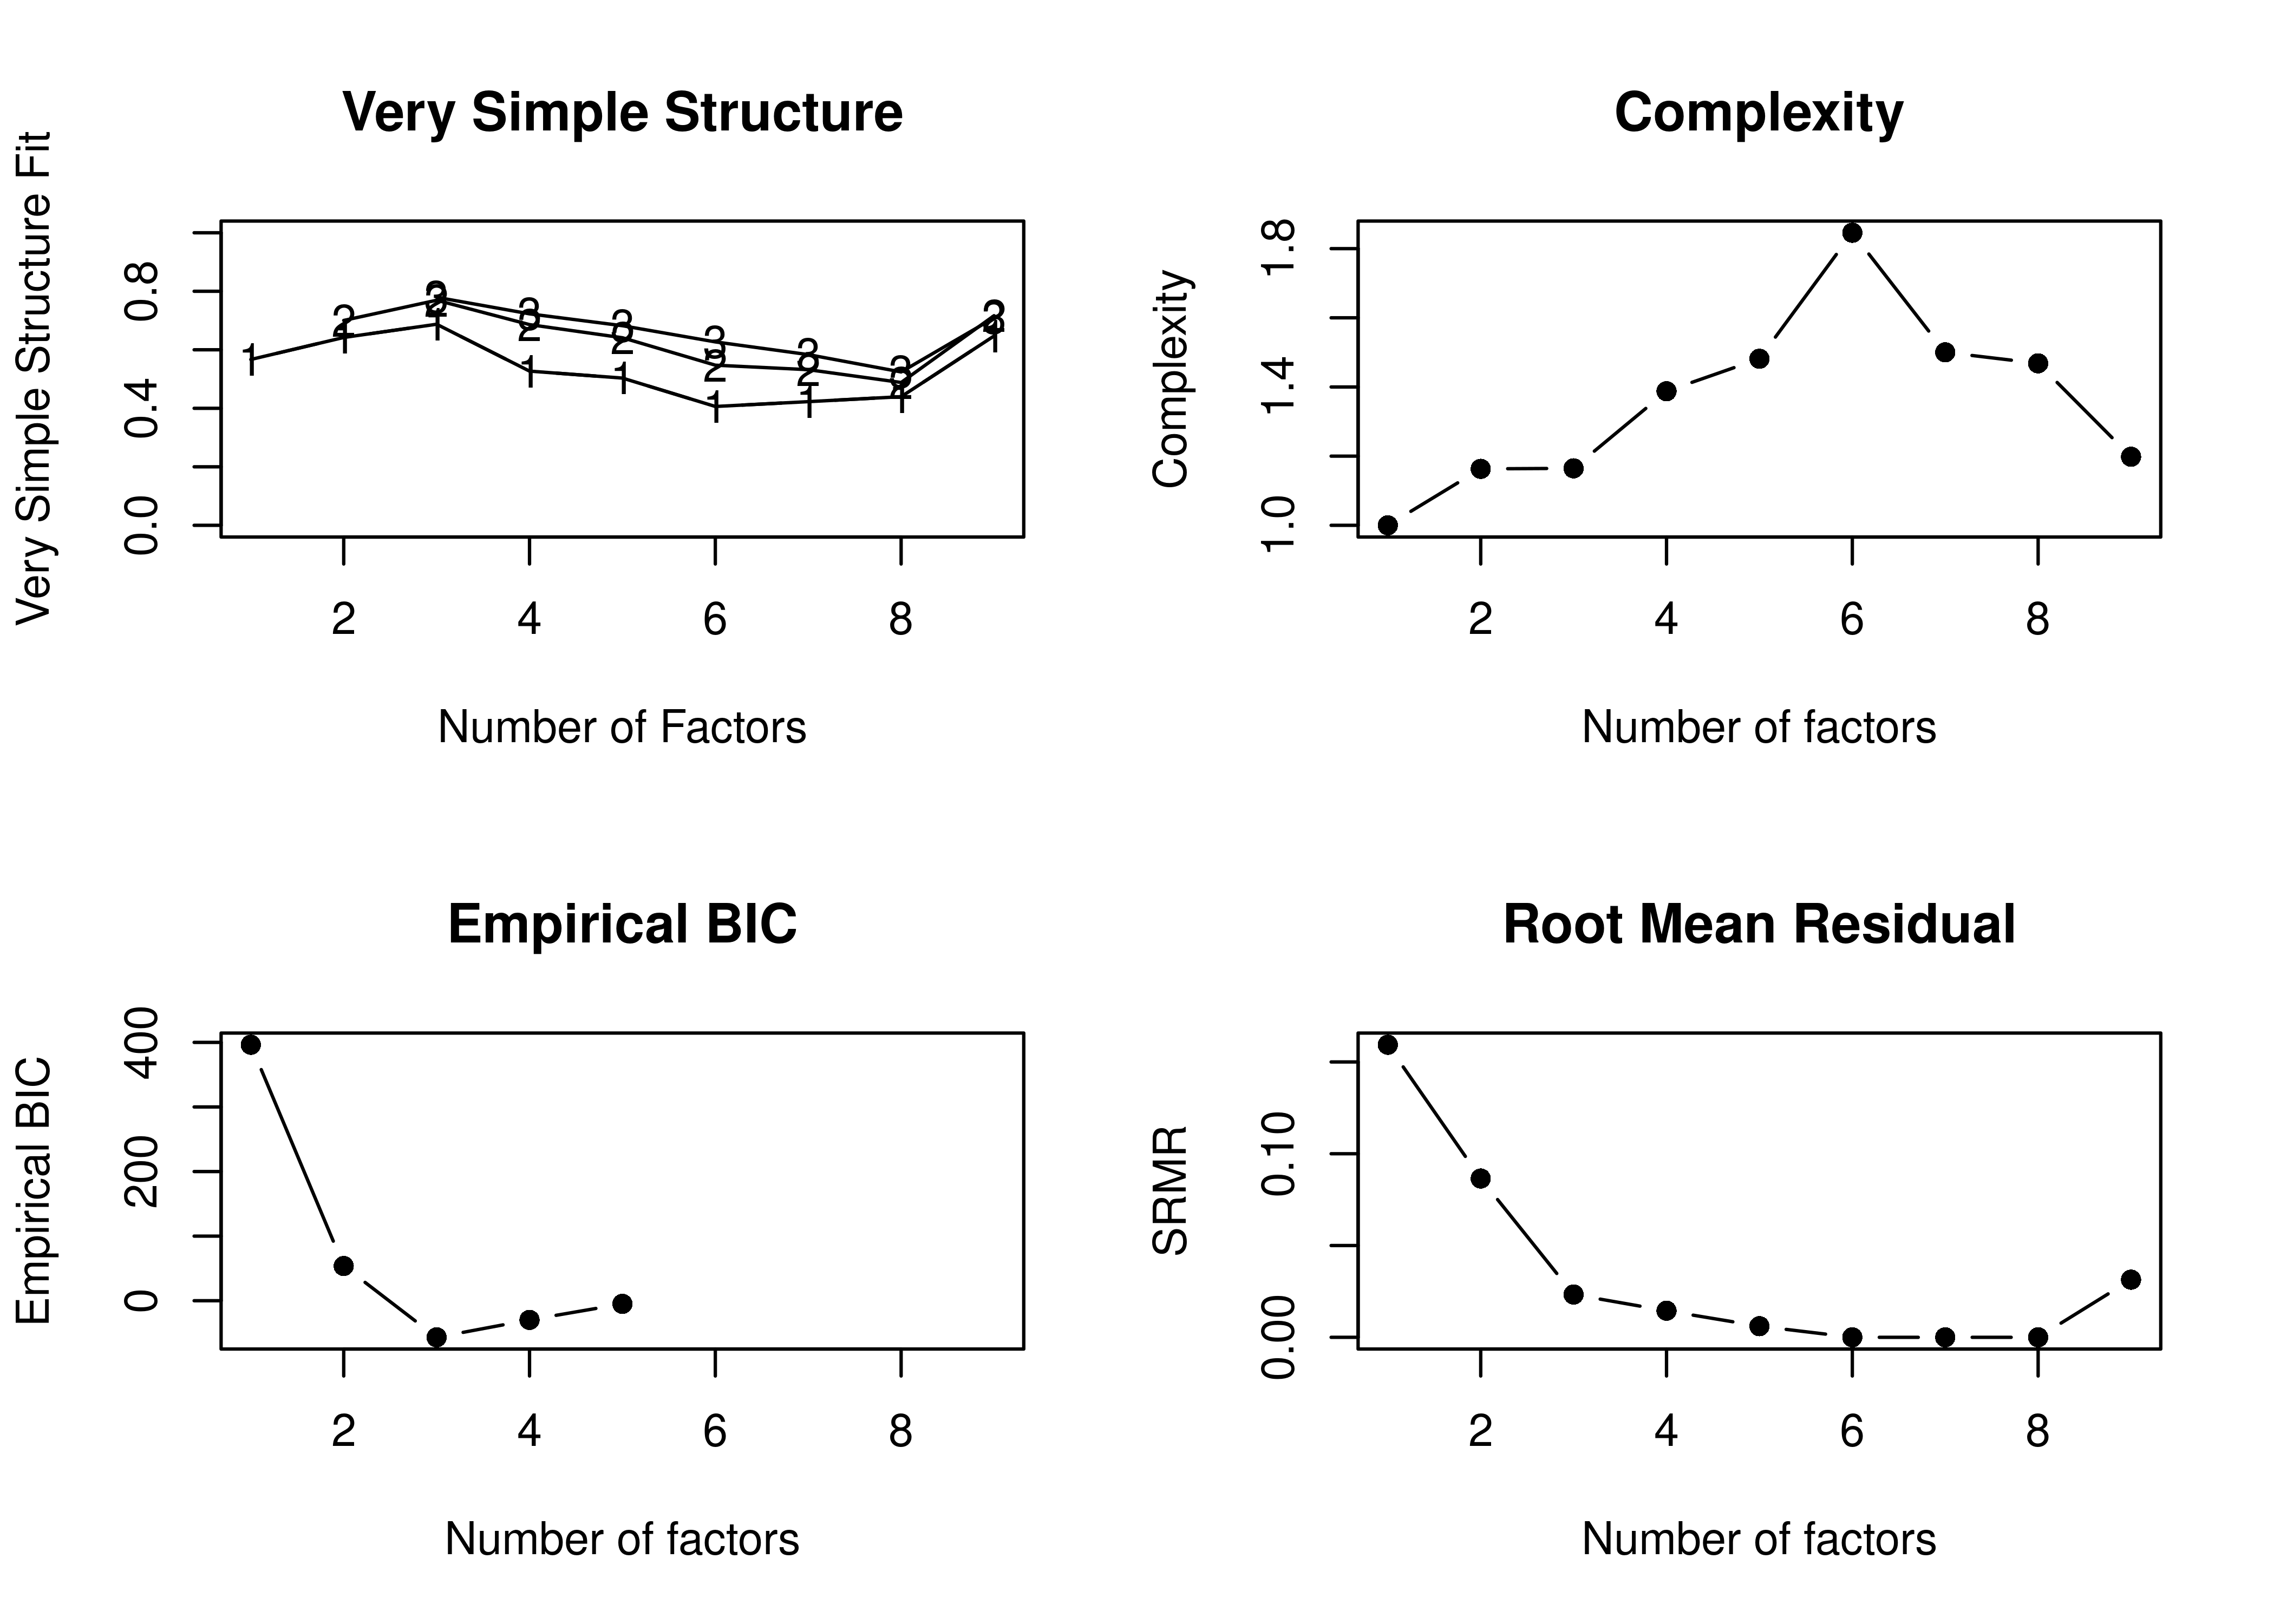 Very Simple Structure-Related Indices With Oblique Rotation in Exploratory Factor Analysis.